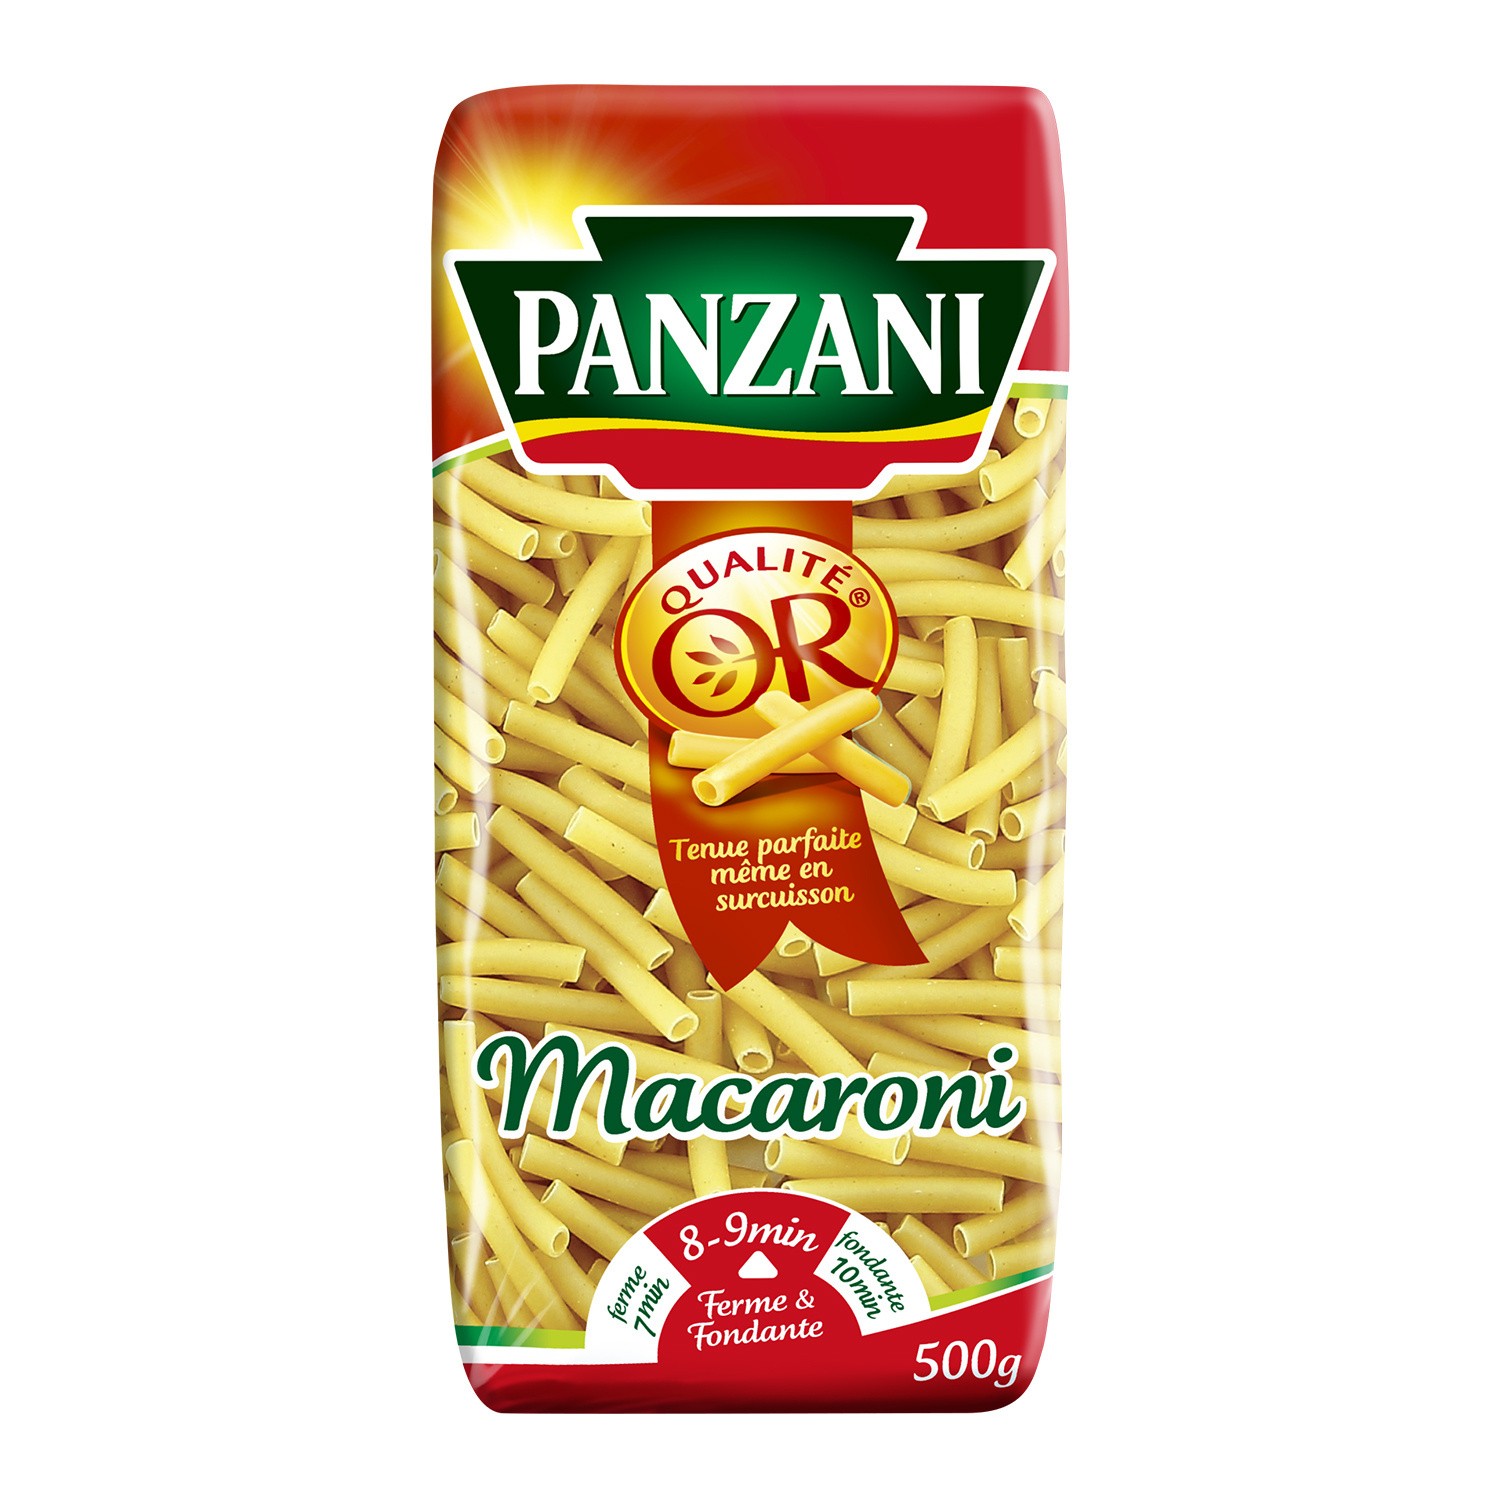 Ebro to sell France-based Panzani pasta and sauce unit in €550m